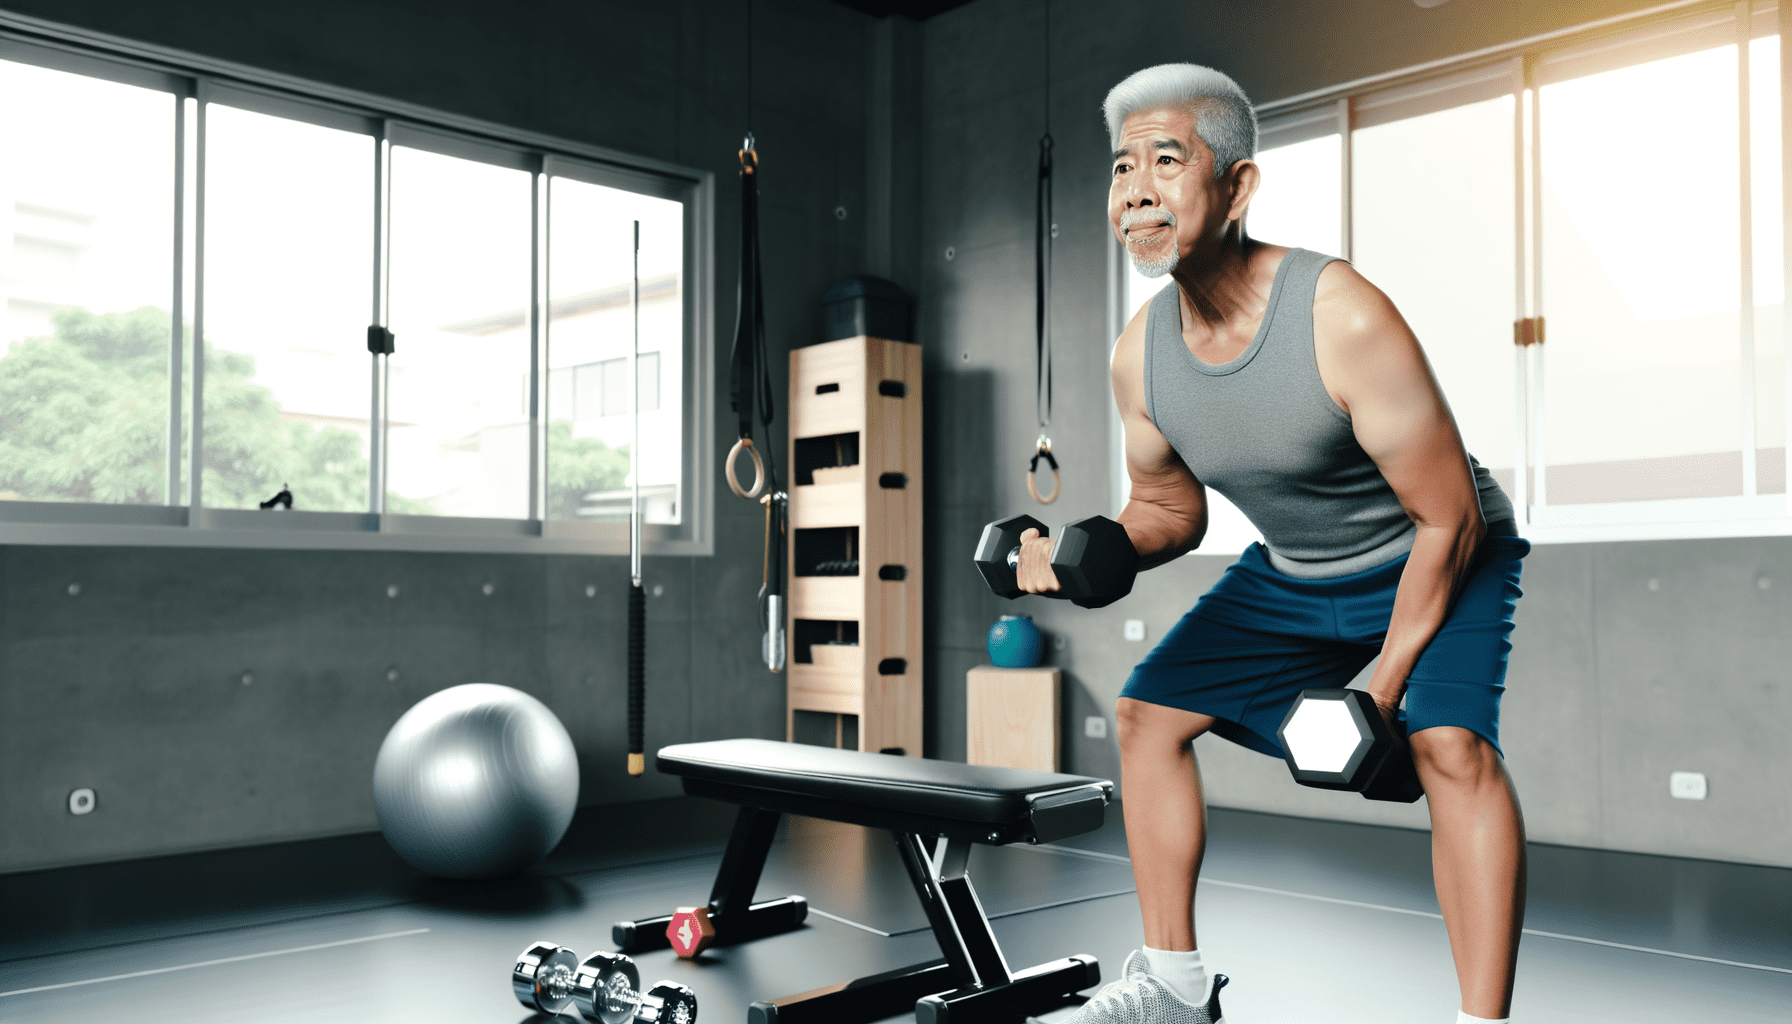 Strength Training After 60: Building Muscle Mass in Later Life